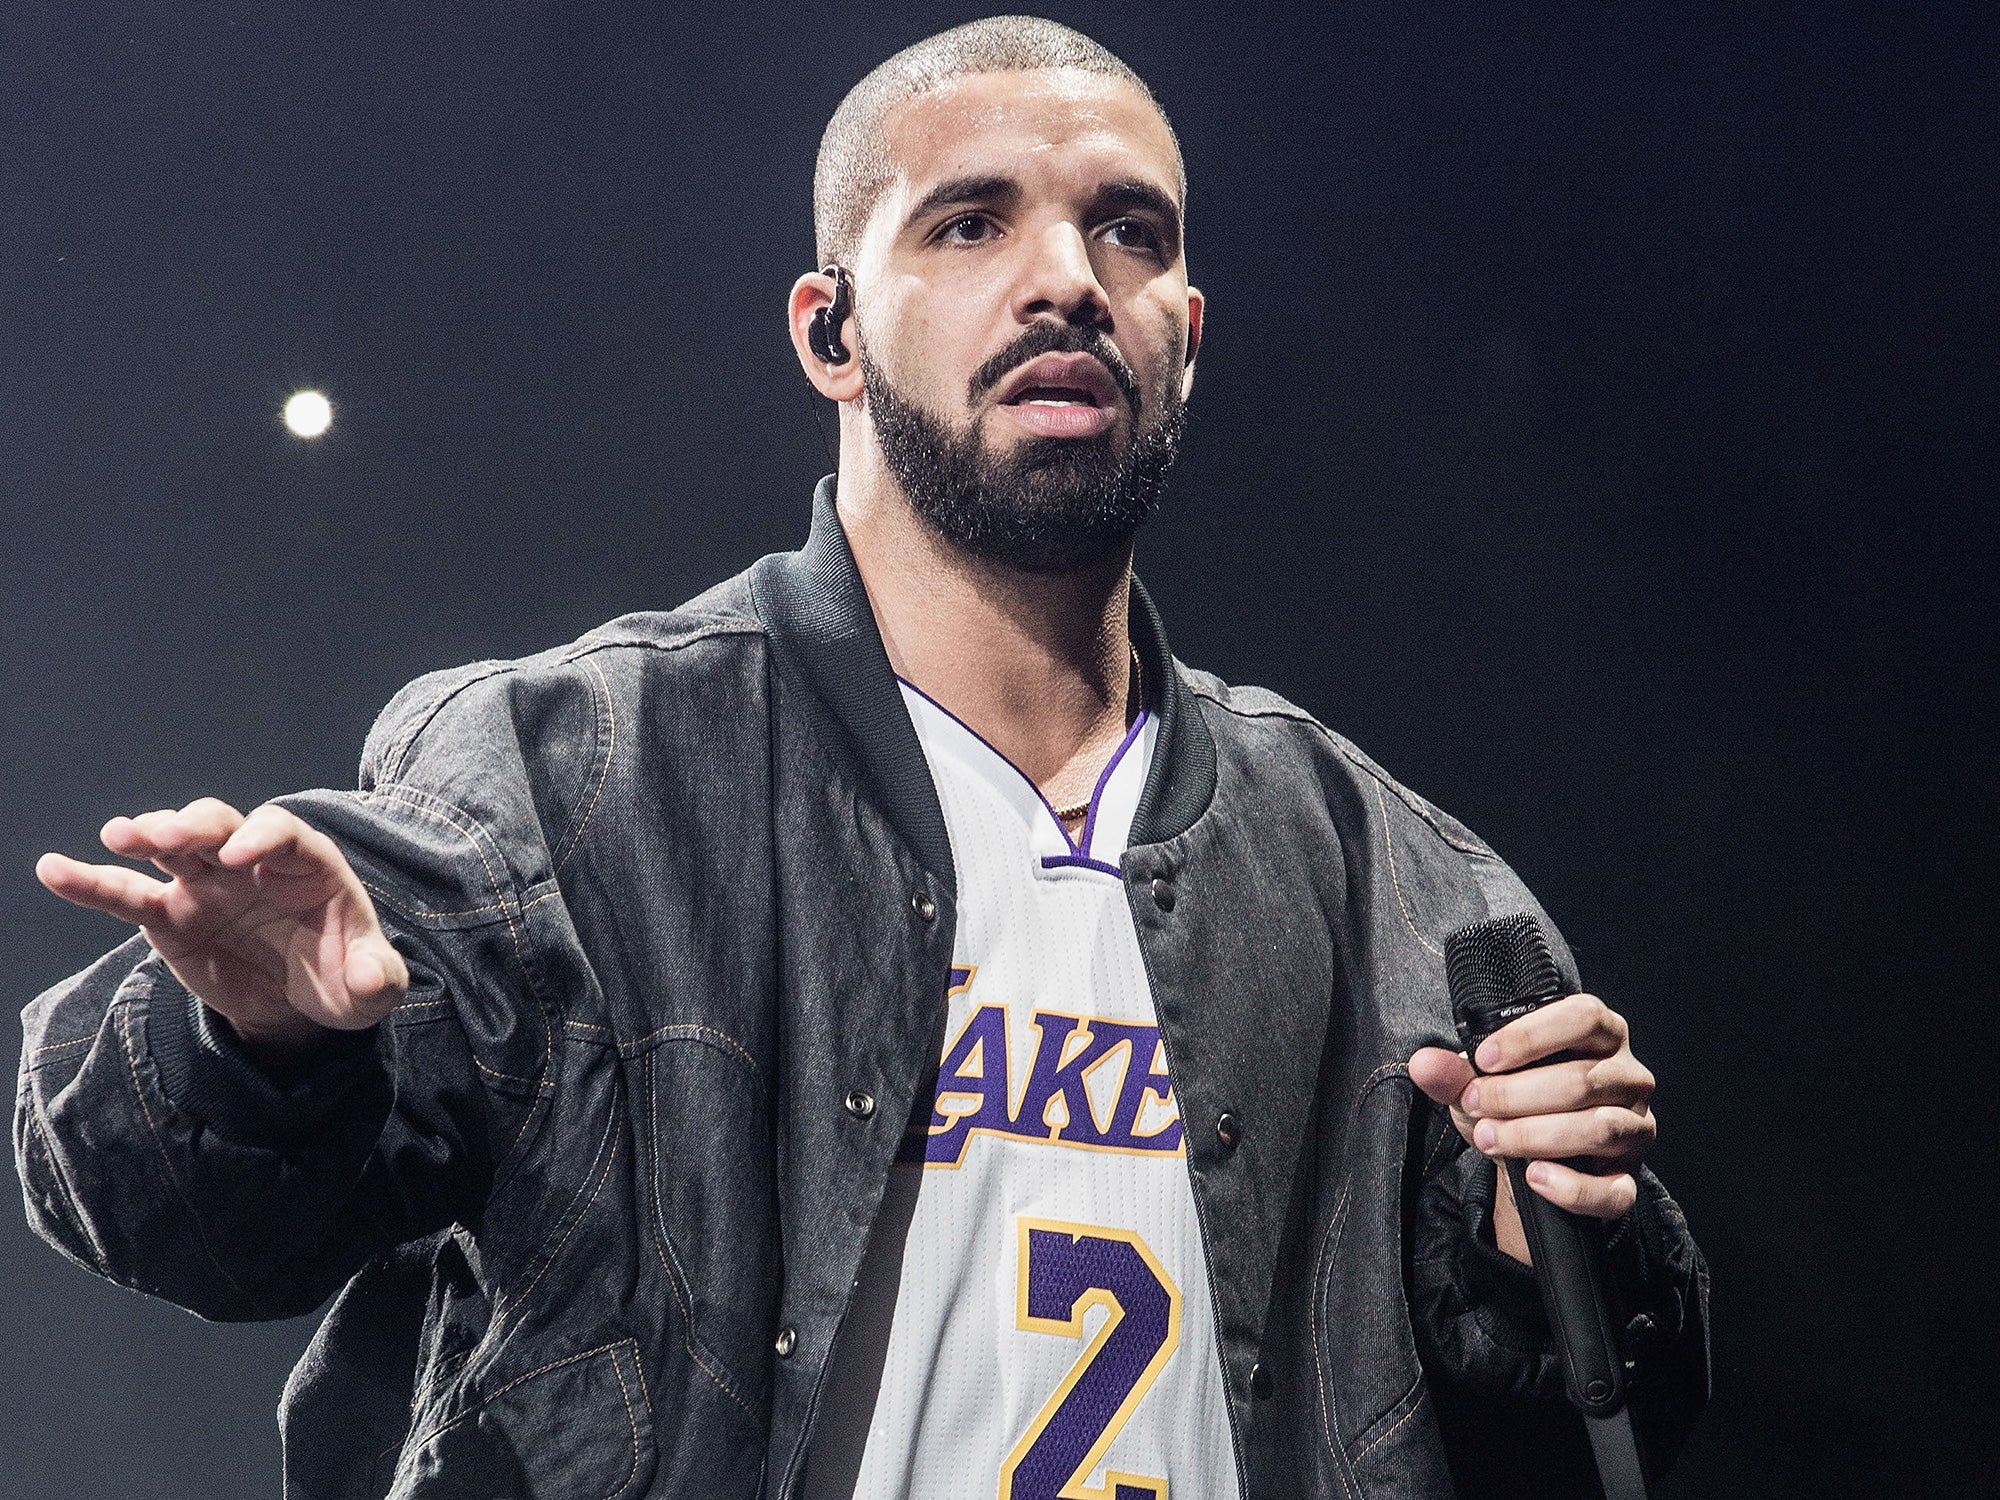 Drake Responds to Rumors He Asked a Fan to Remove Her Hijab: 'I Am Being Utilized in a Fake Media Story'
